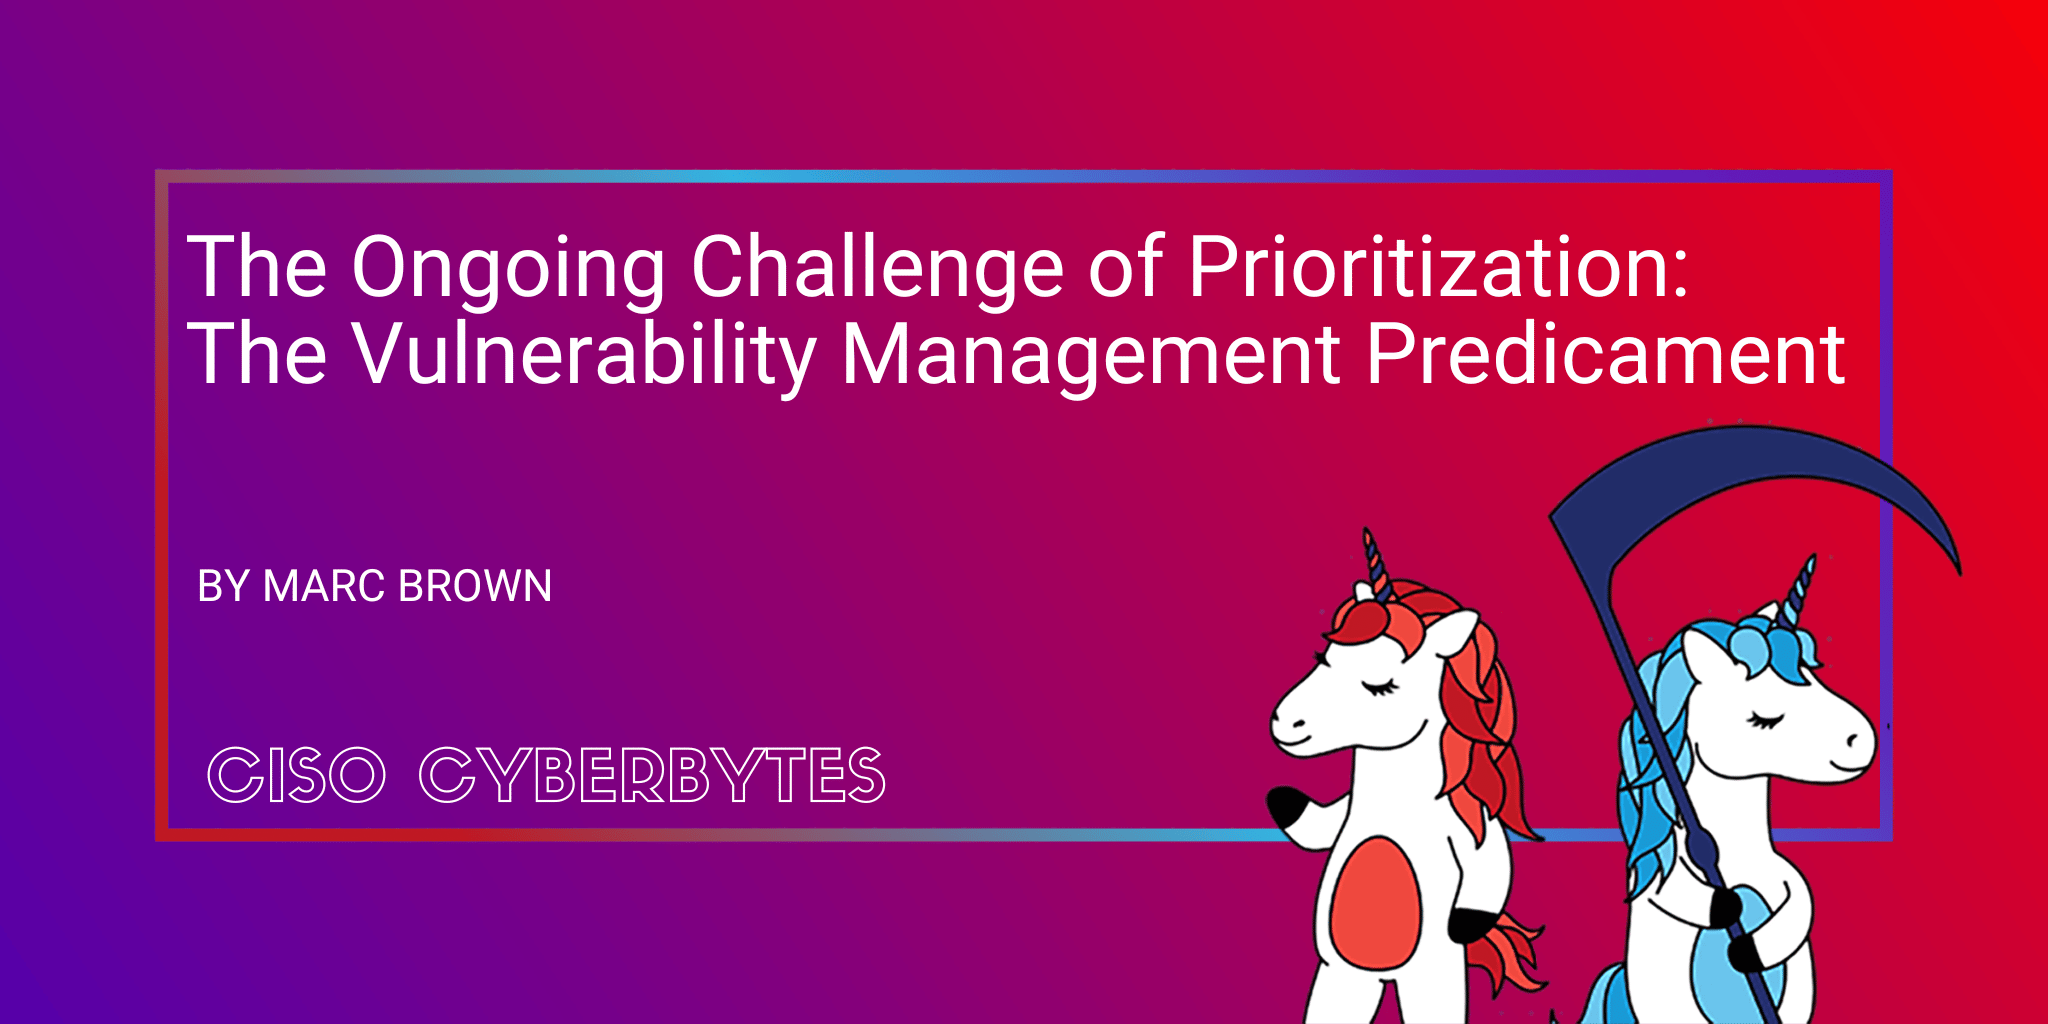 The Ongoing Challenge of Prioritization: The Vulnerability Management Predicament